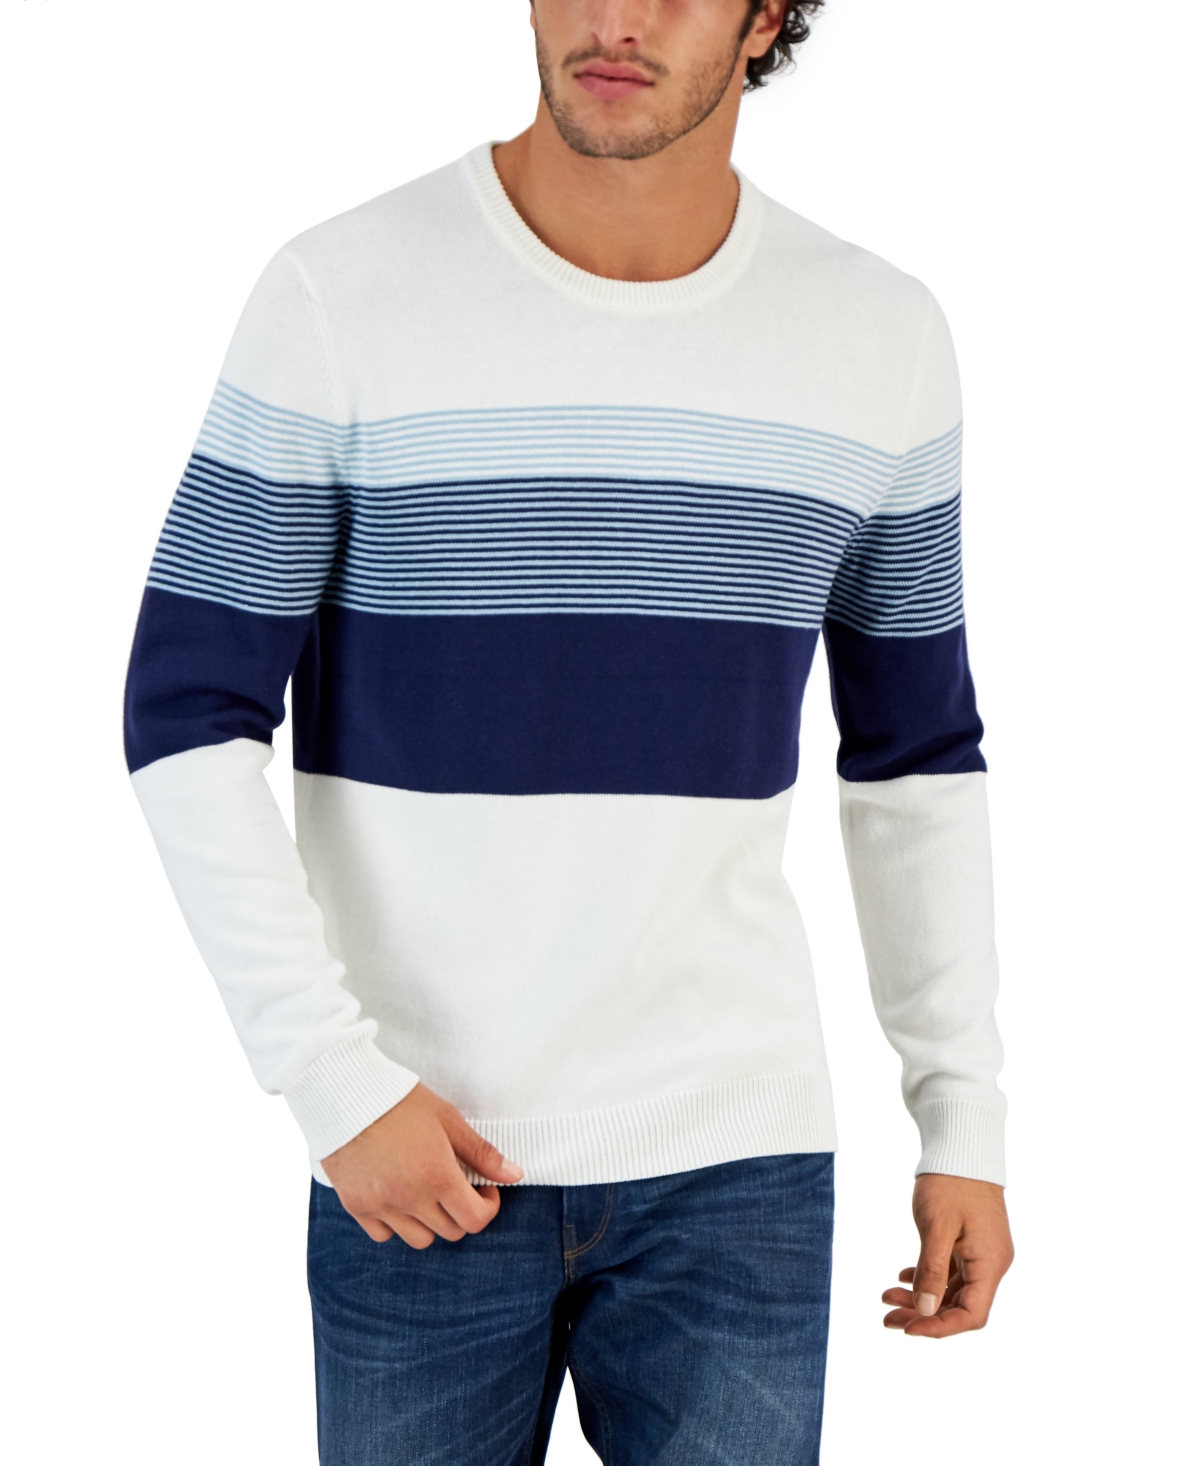 Men's Striped Sweater, Created for Macy's - Navy Blue